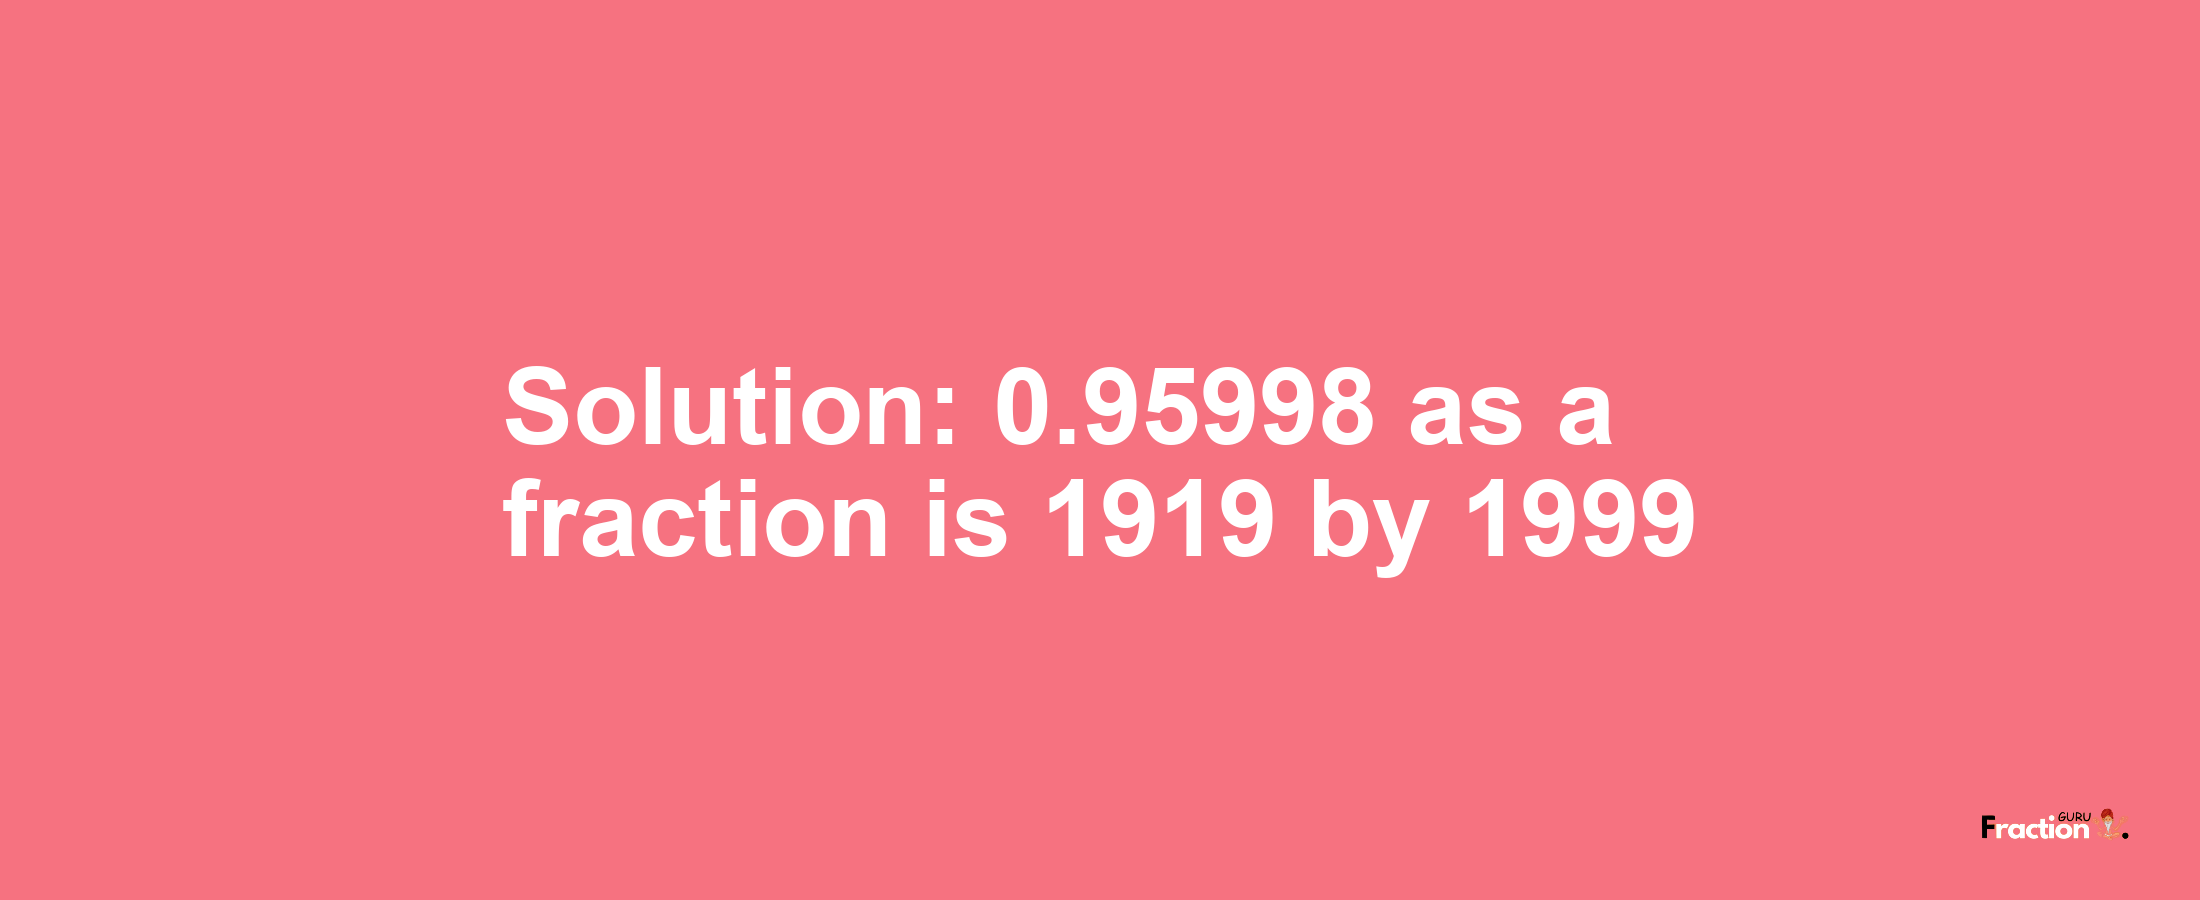 Solution:0.95998 as a fraction is 1919/1999